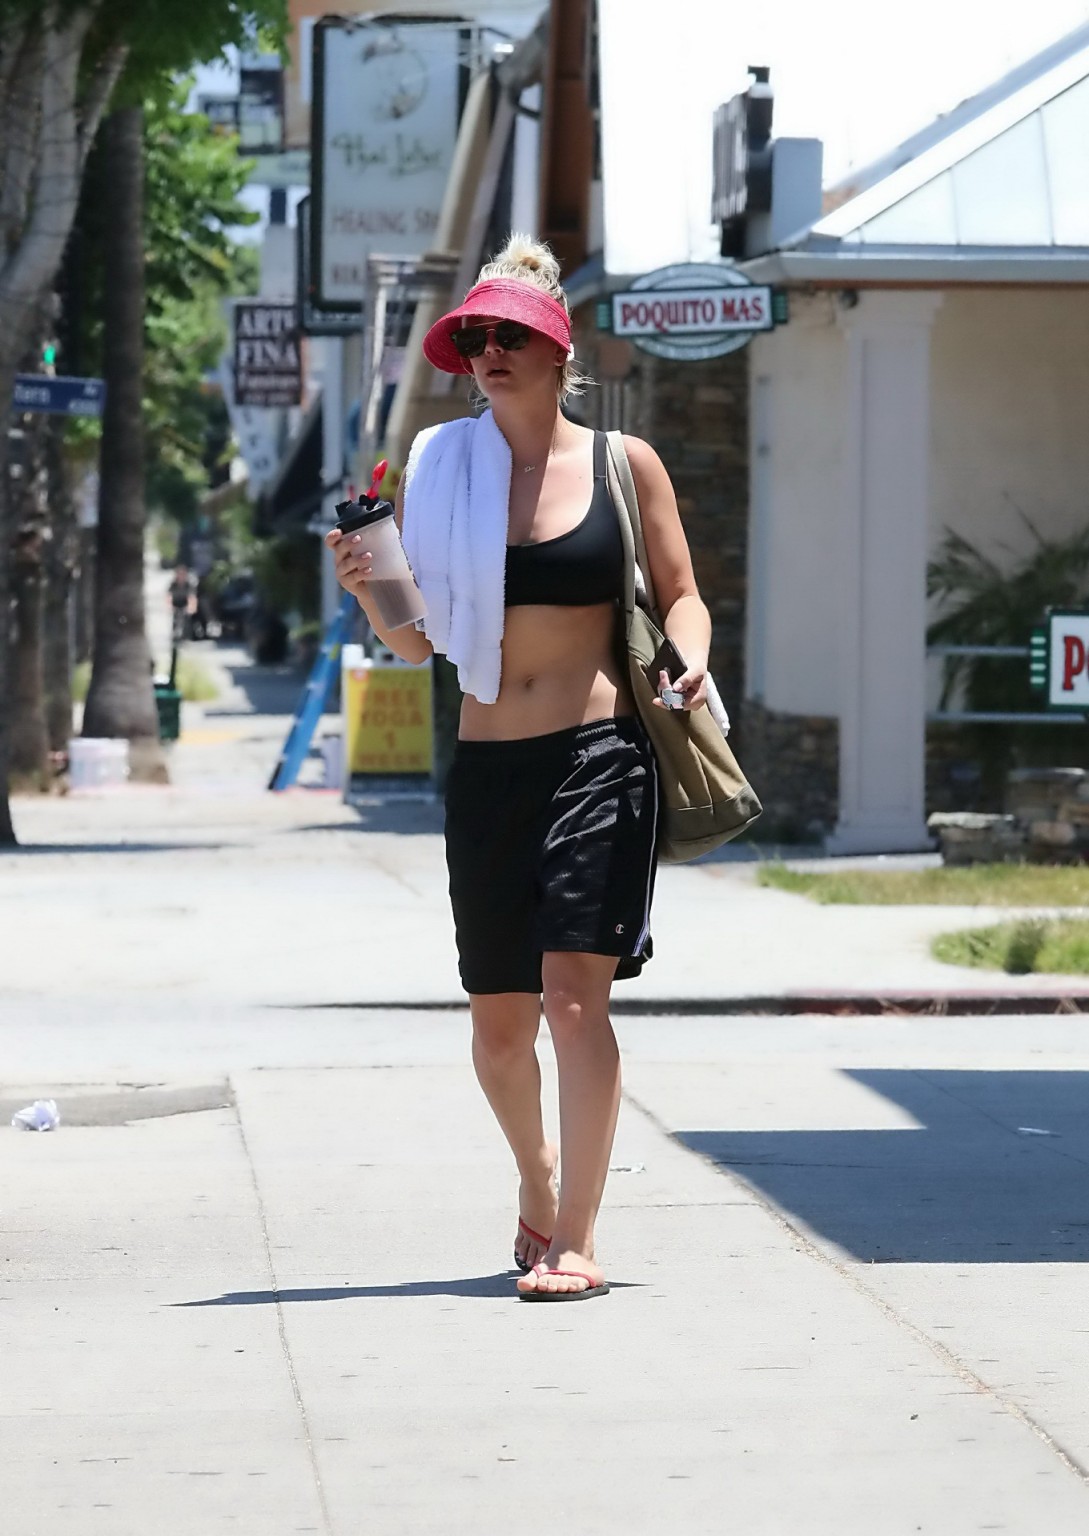 Kaley Cuoco busty in sports bra and shorts out in LA #75159302